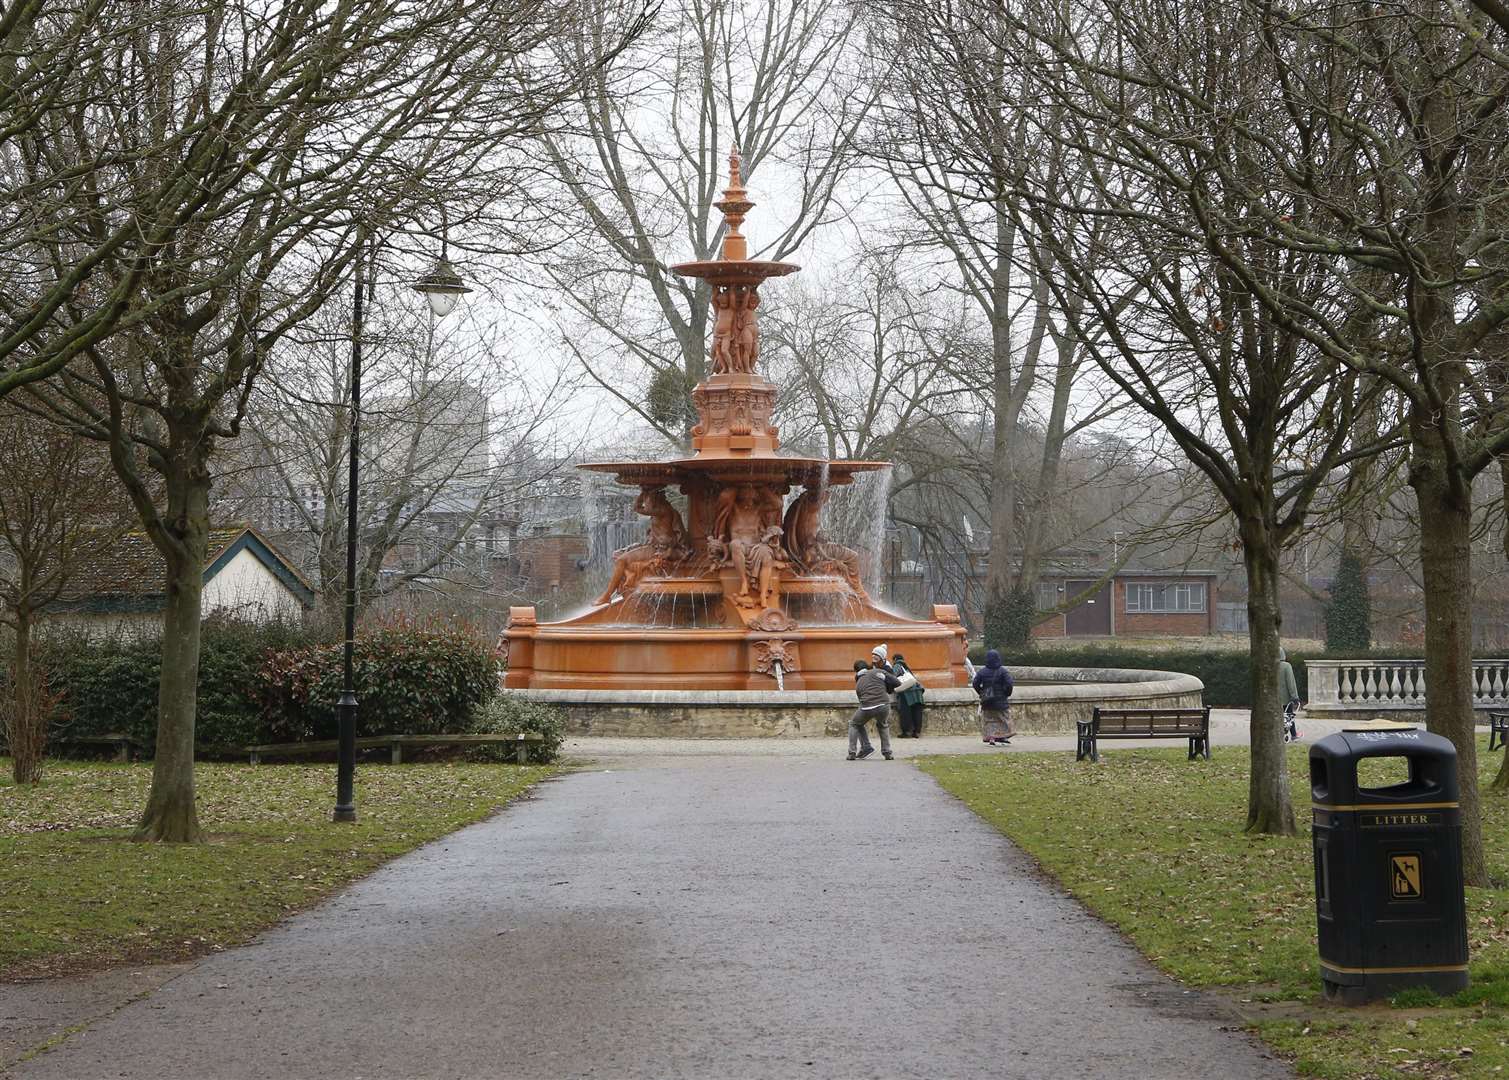 Hilden threatened one of his victims at the water fountain in Ashford's Victoria Park